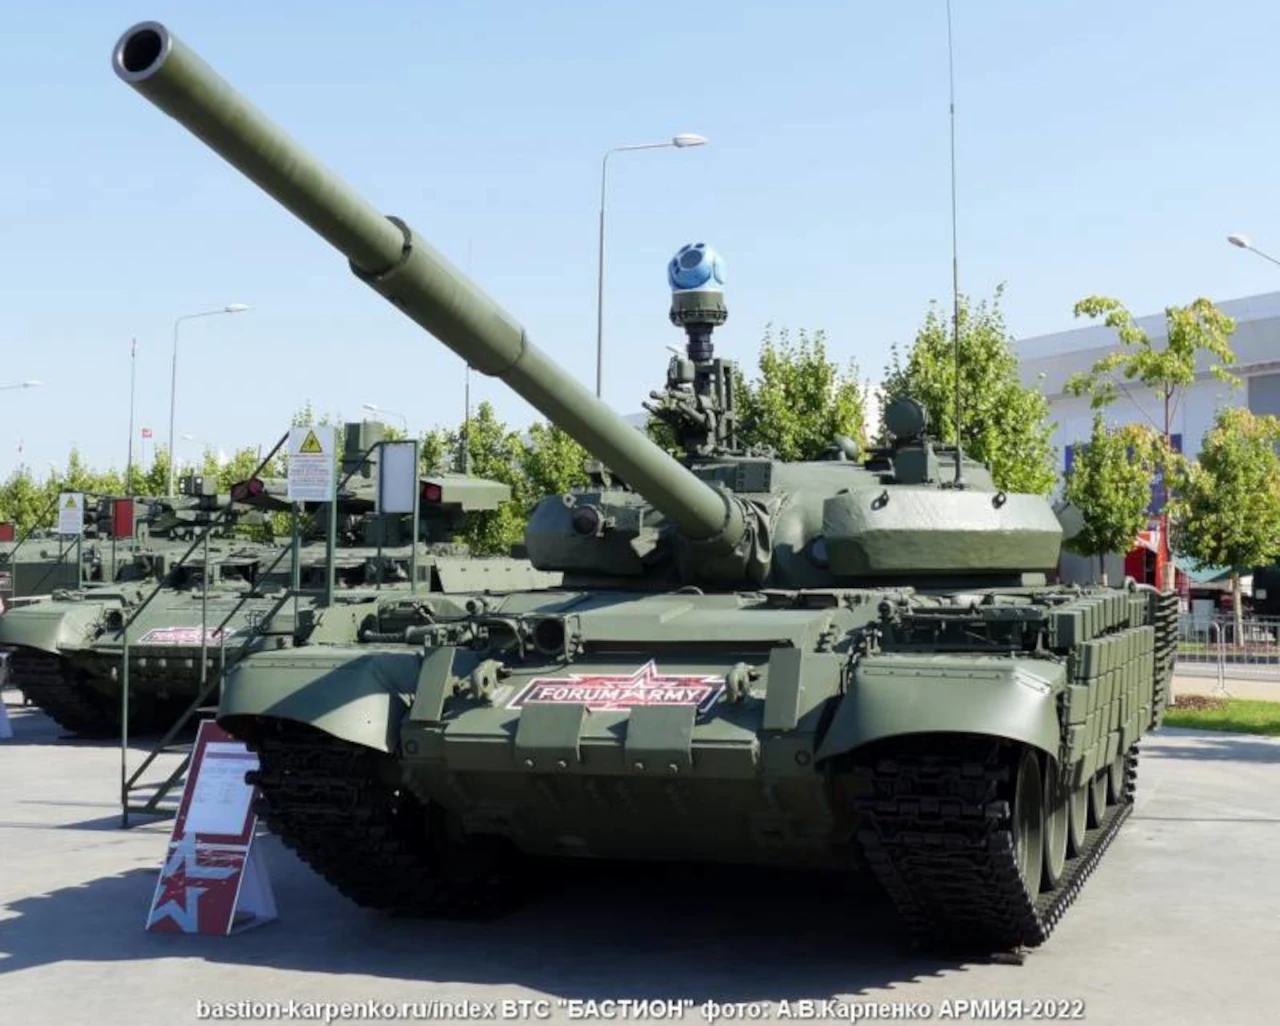 Modernization option for the T-62M from the 103rd BTRZ at the Army-2022 forum